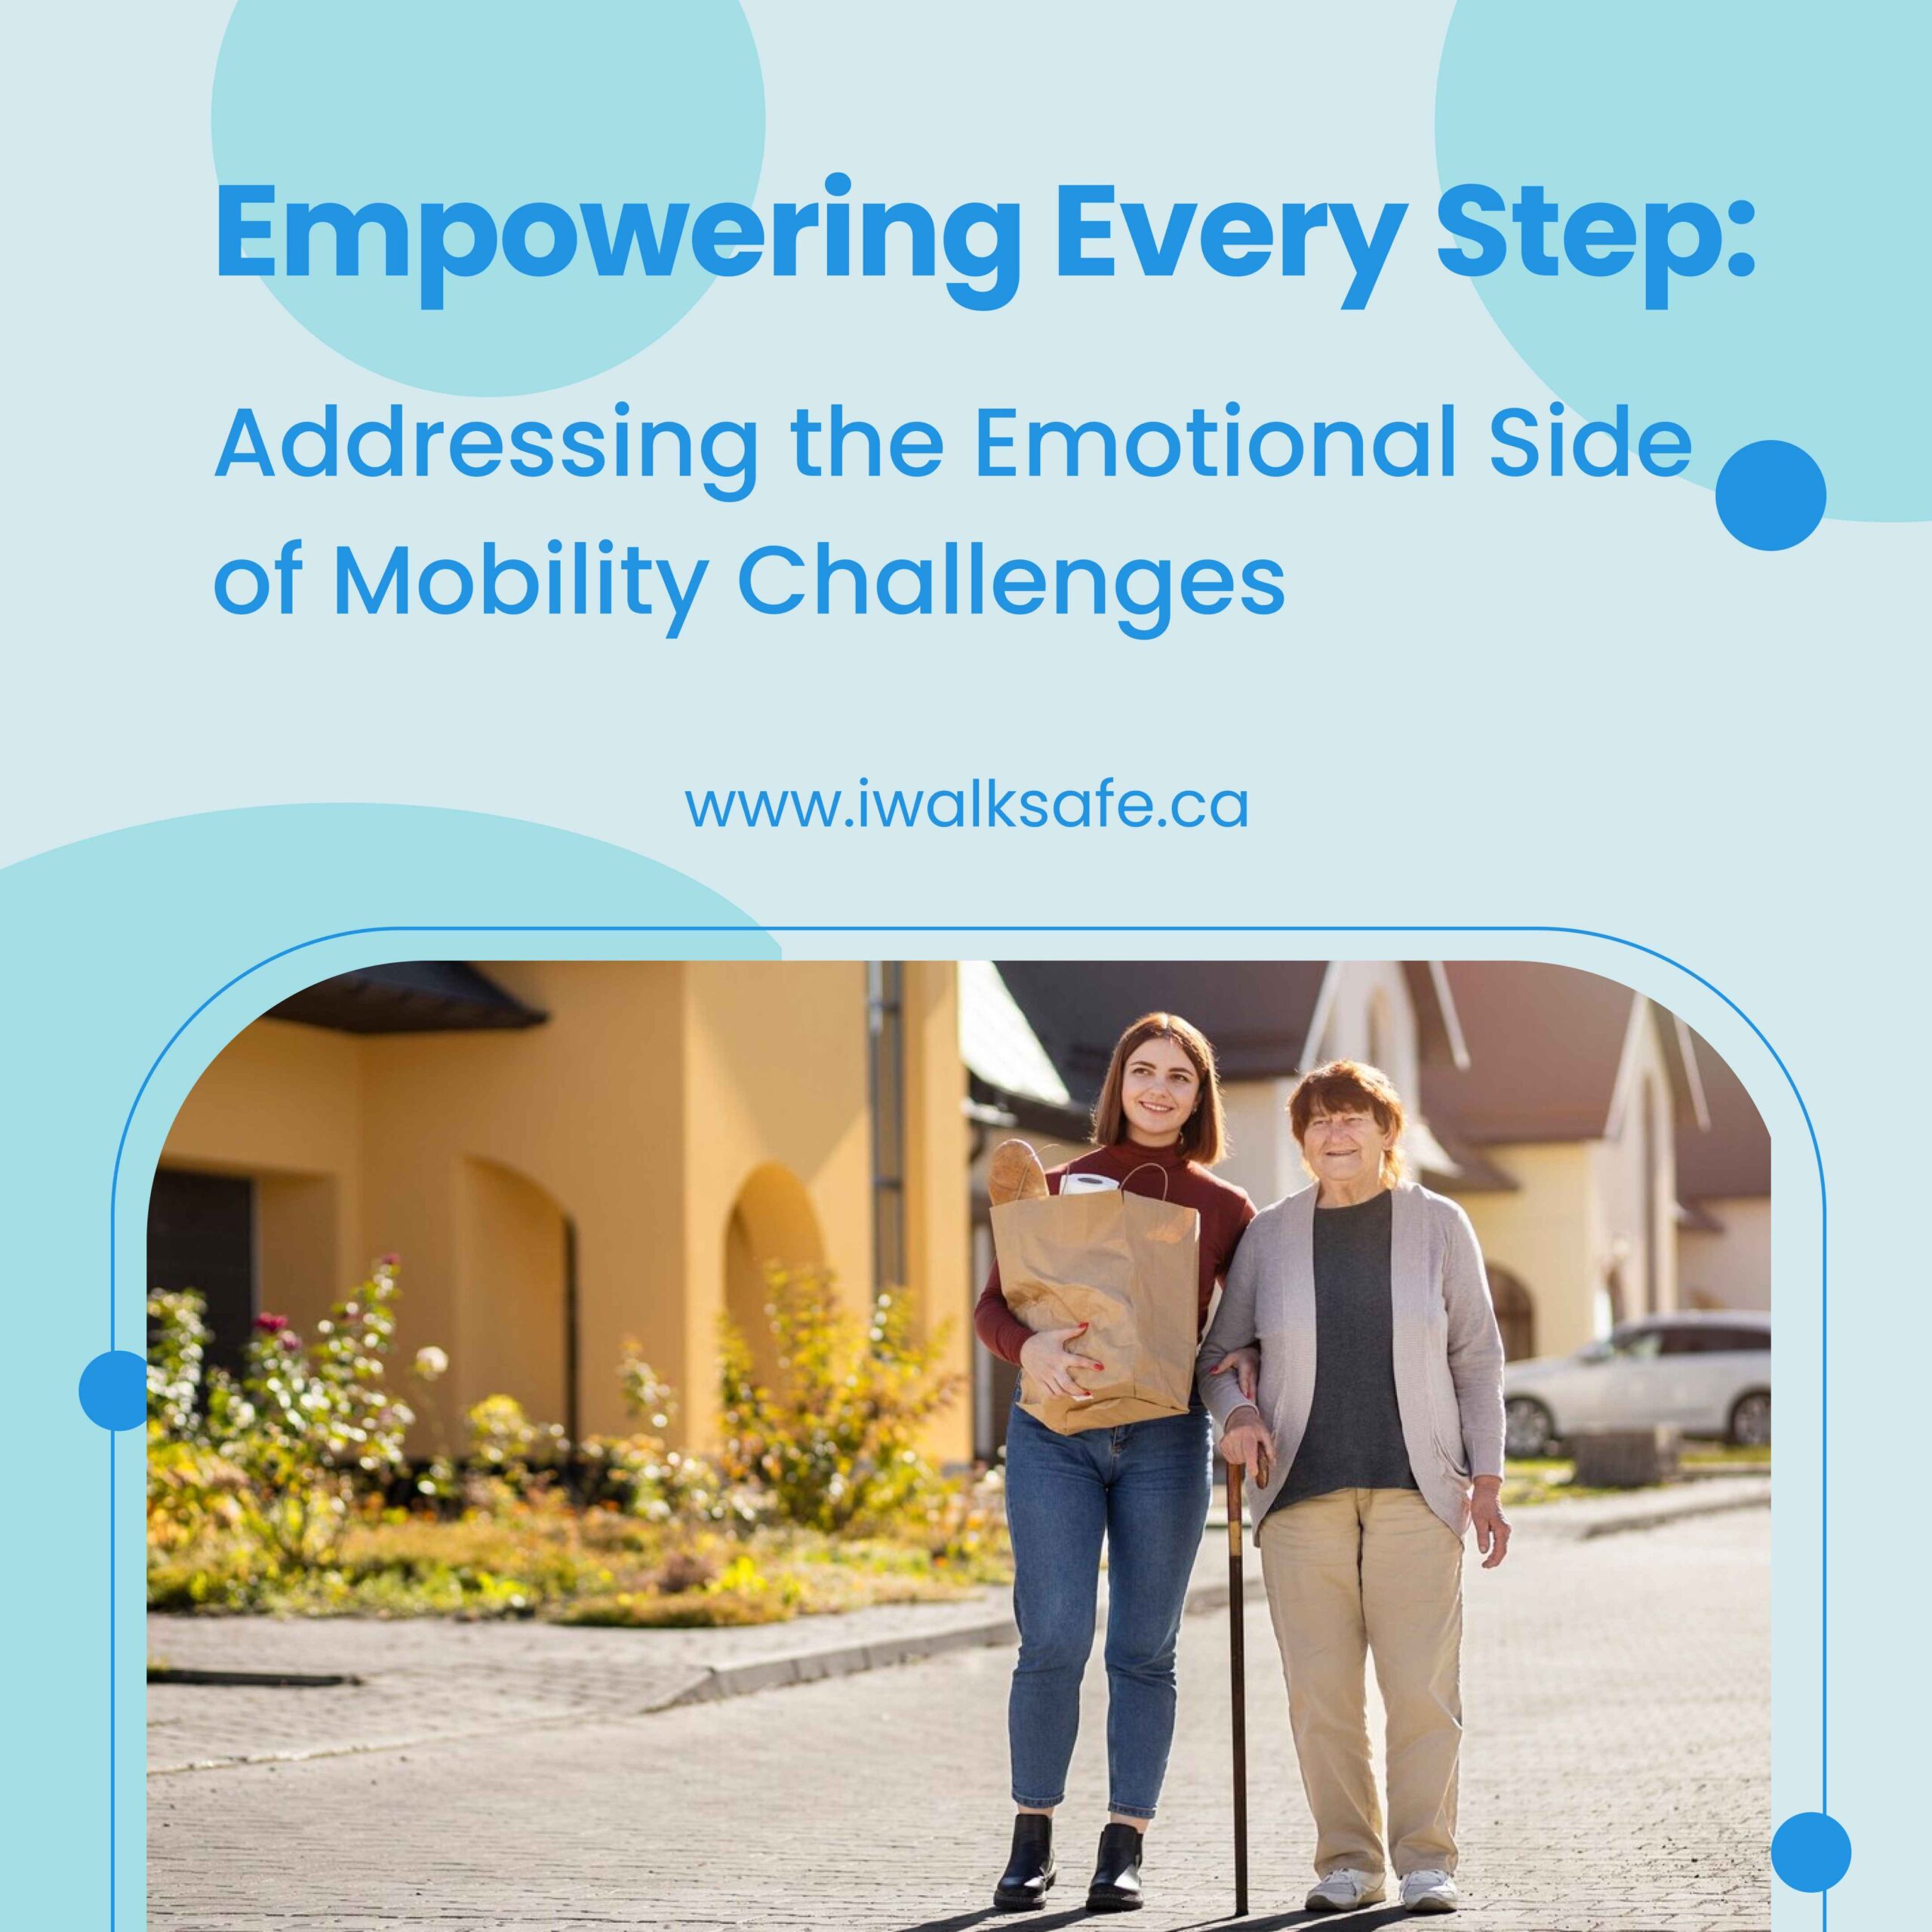 Empowering Every Step: Addressing the Emotional Side of Mobility Challenges